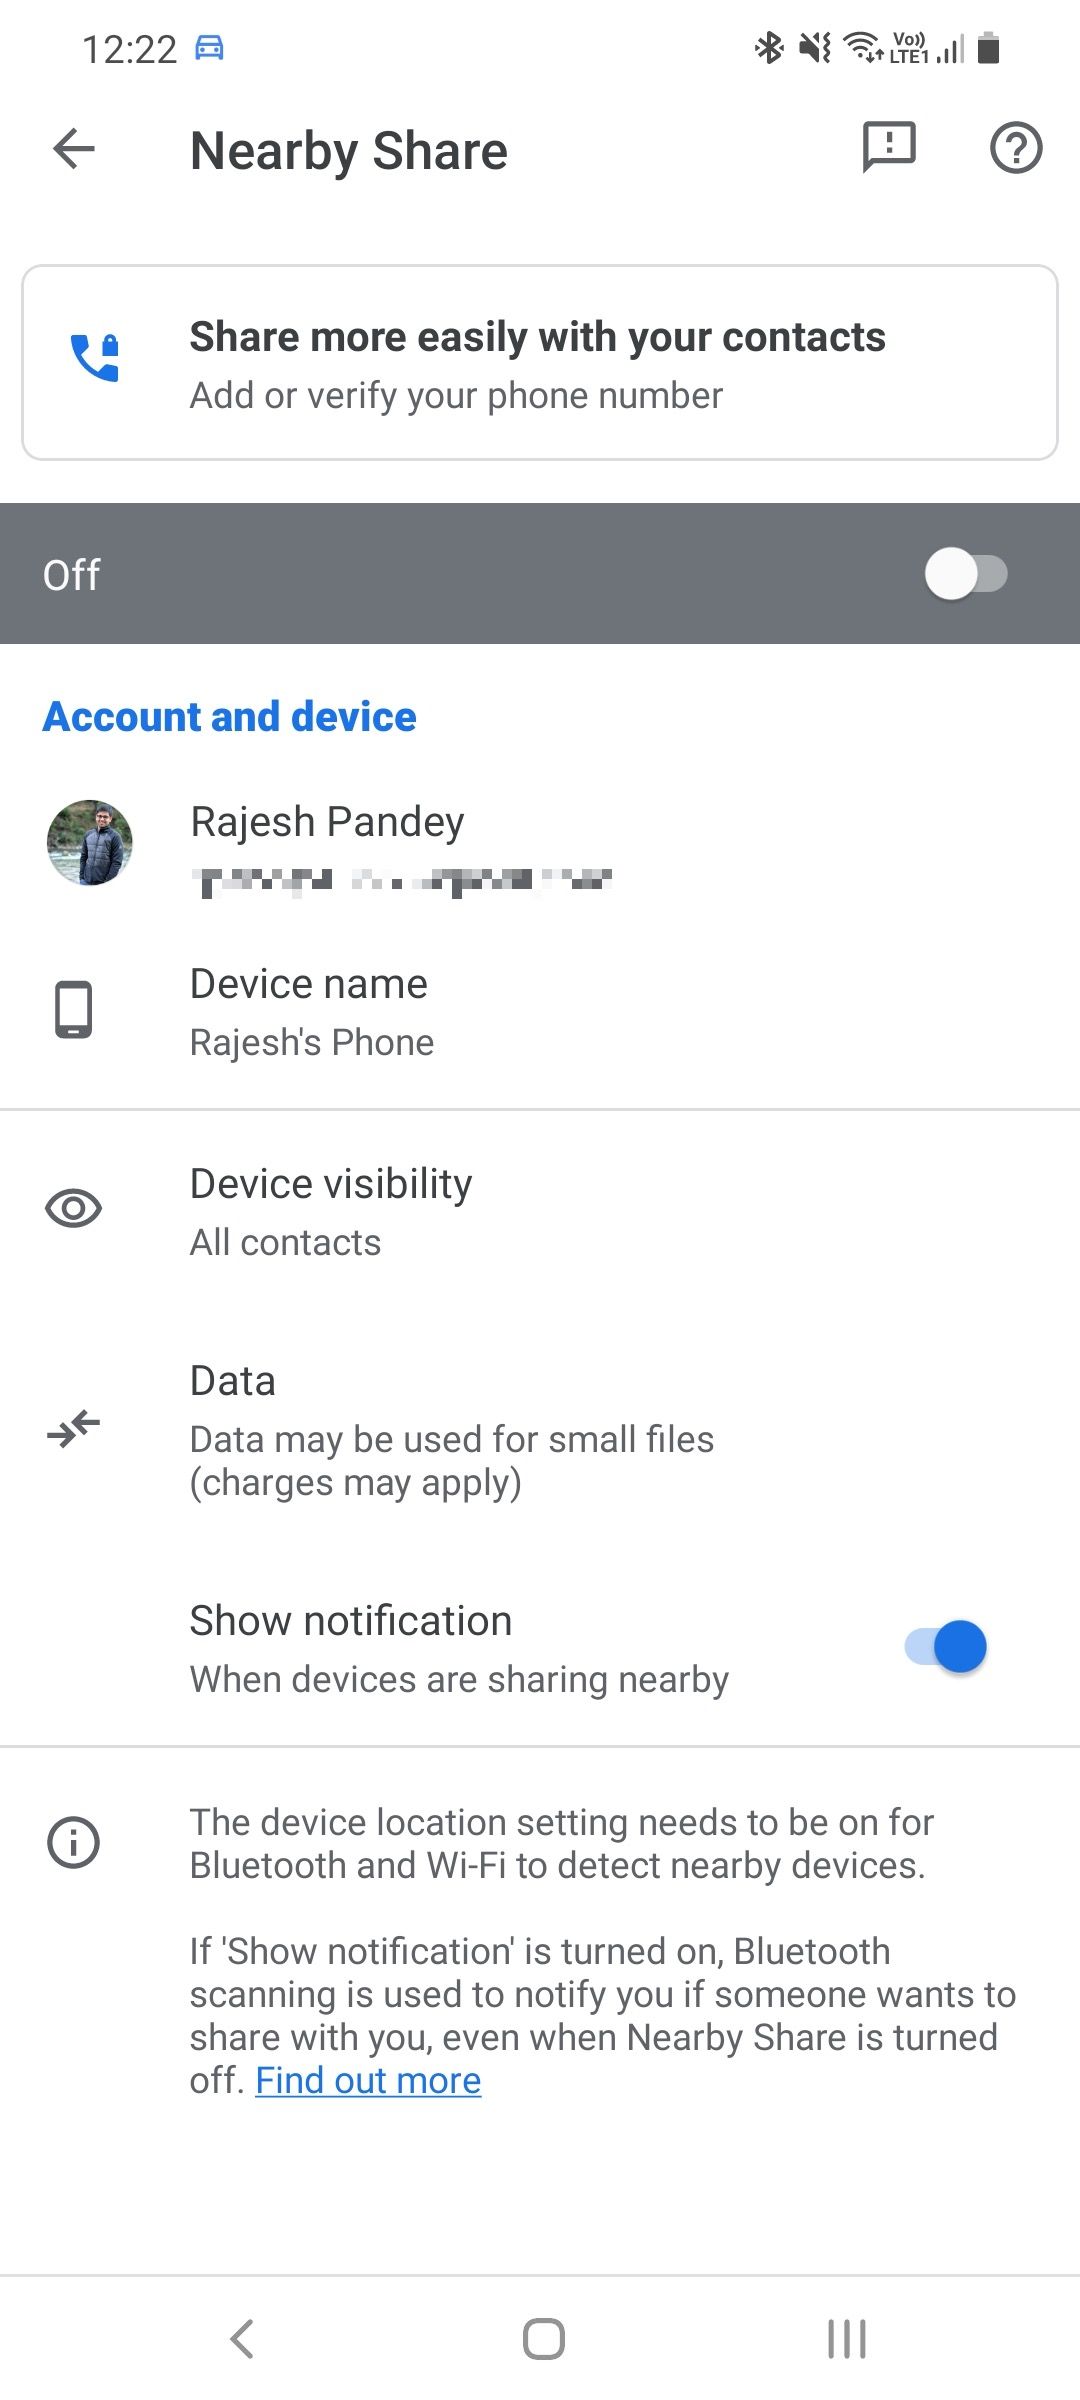 Setup Nearby Share on Android